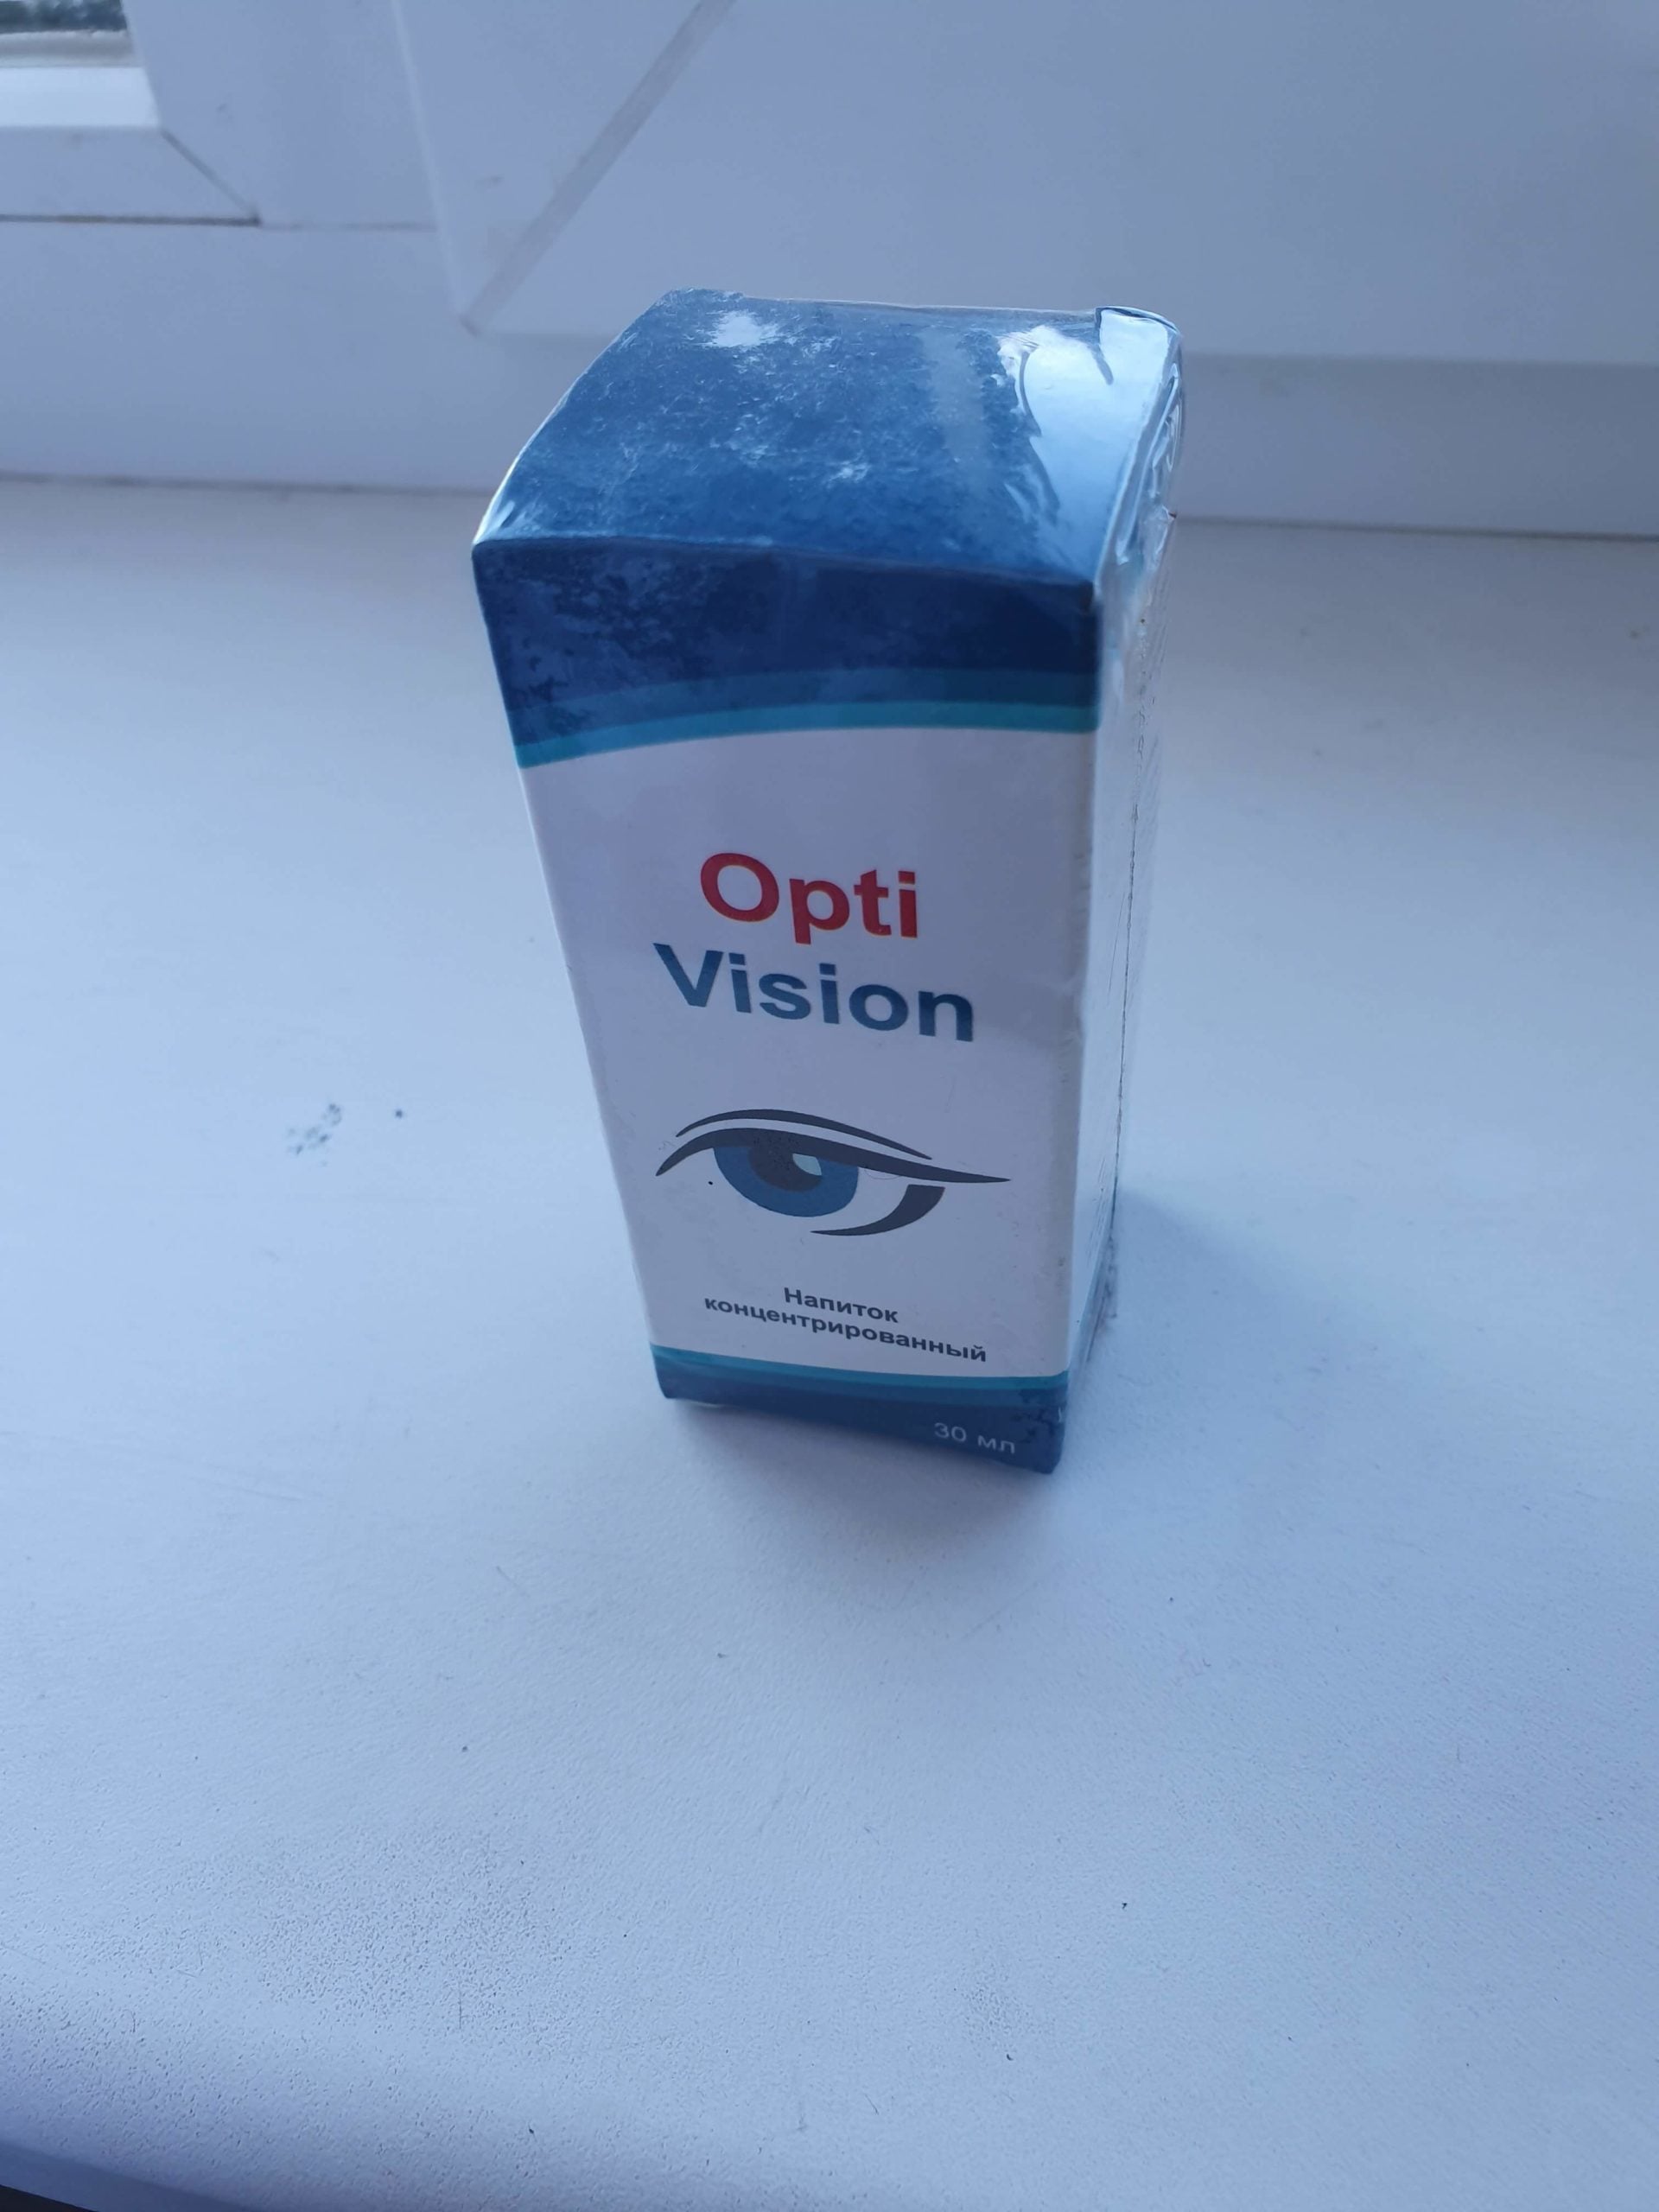 ActiVision and optivision to restore vision and treat eye diseases